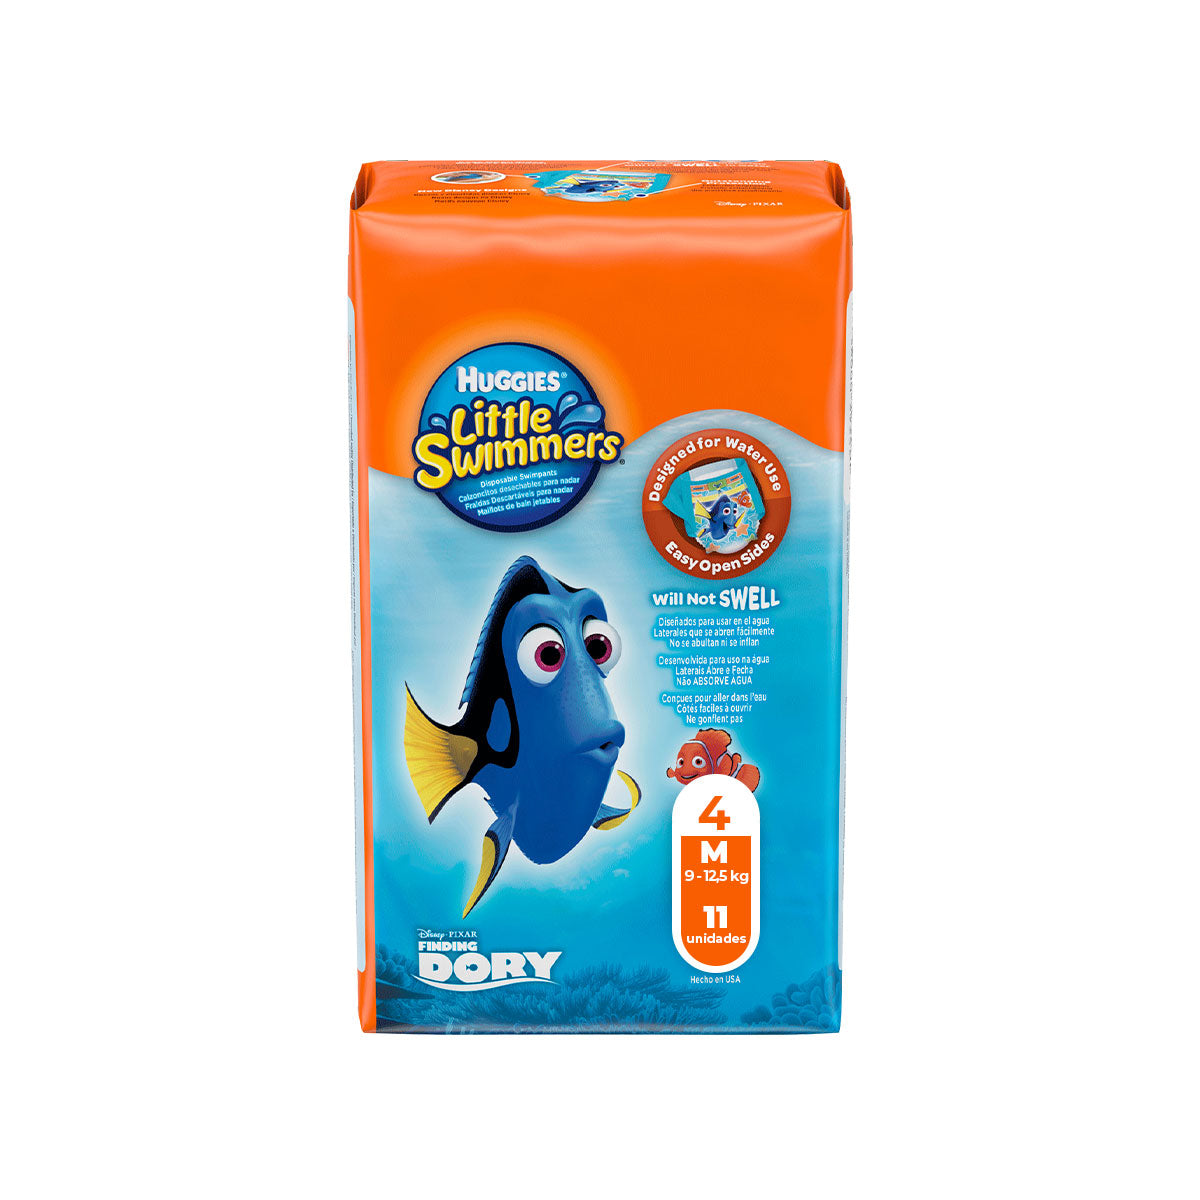 Pañales Huggies Little Swimmers Mediano 9-12,5kg (11 unidades)